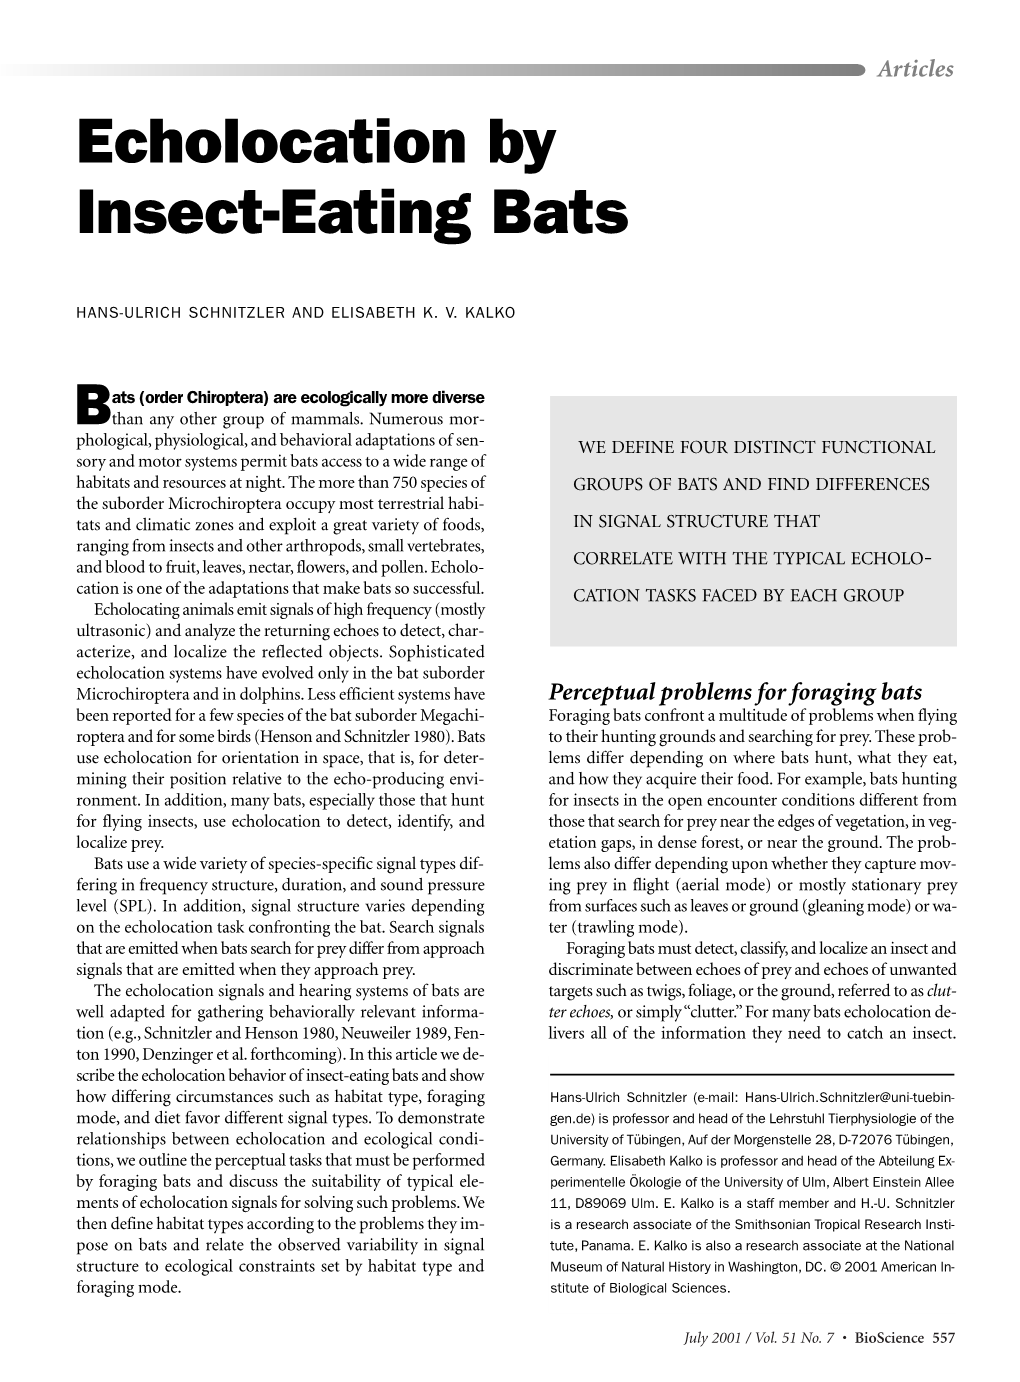 Echolocation by Insect-Eating Bats